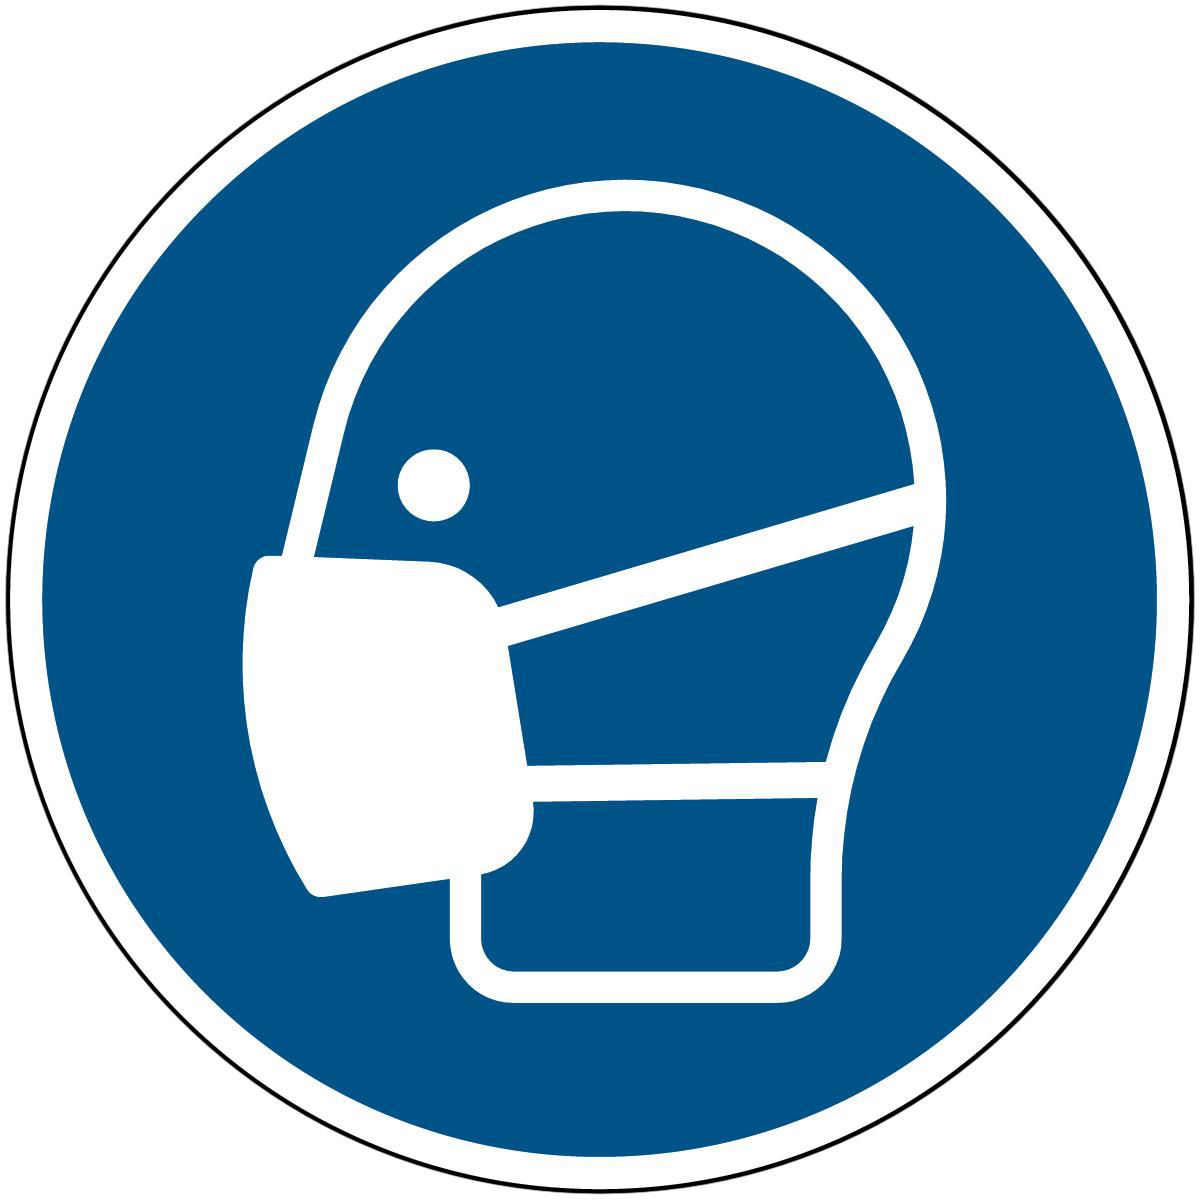 Brady PIC M016-DIA 500-FLO-CRD1 W128404595 ISO Safety Sign - Wear a mask 